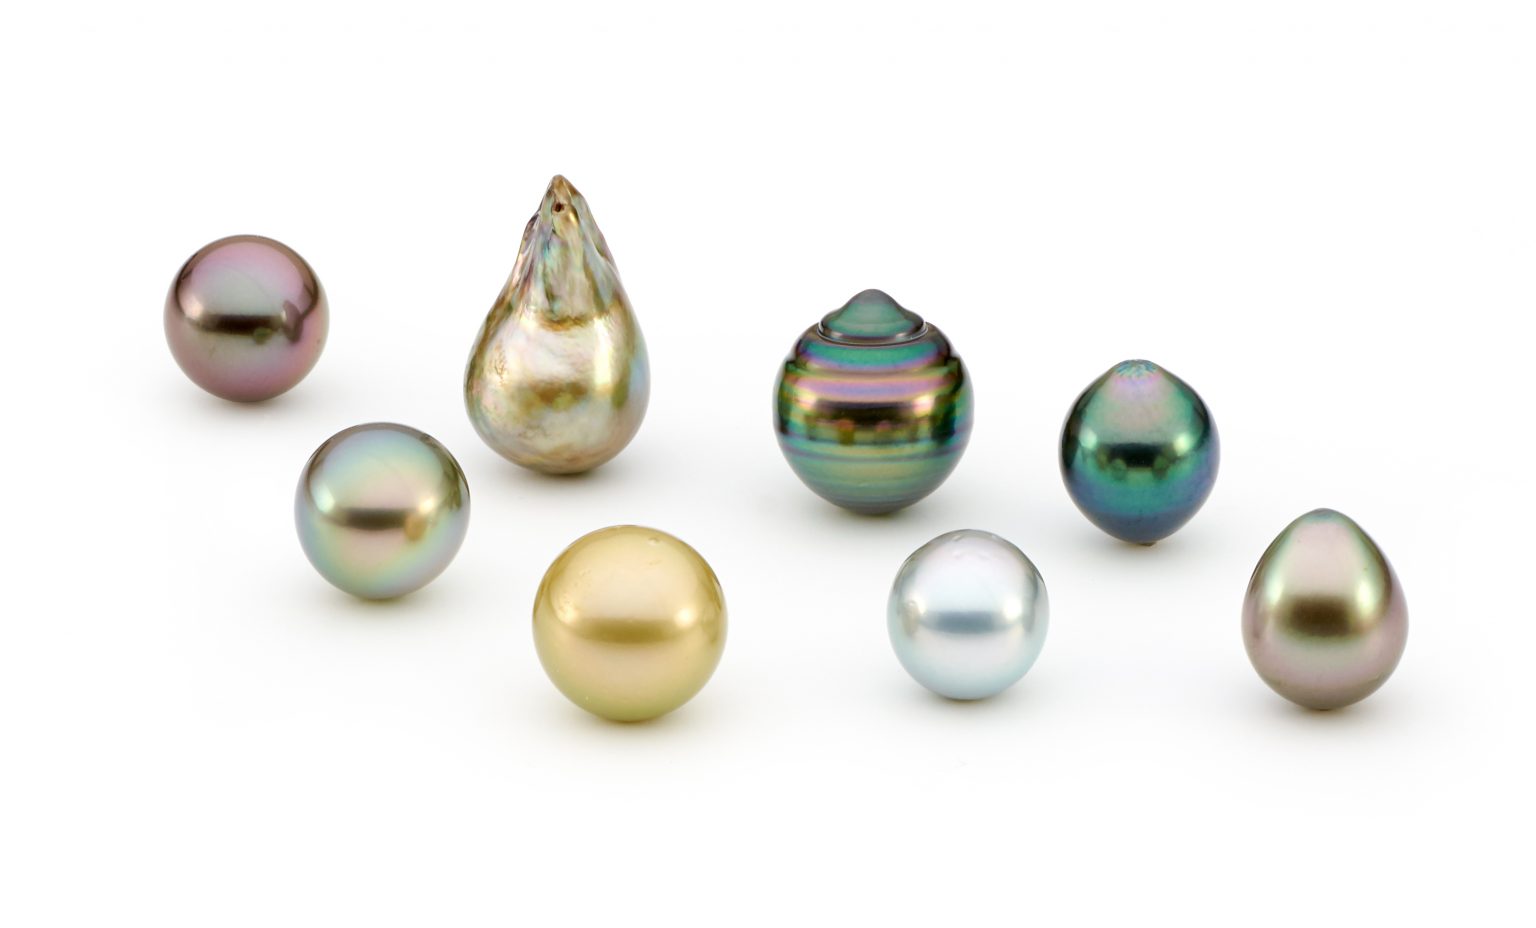 About Pearls - Aquarian Pearls